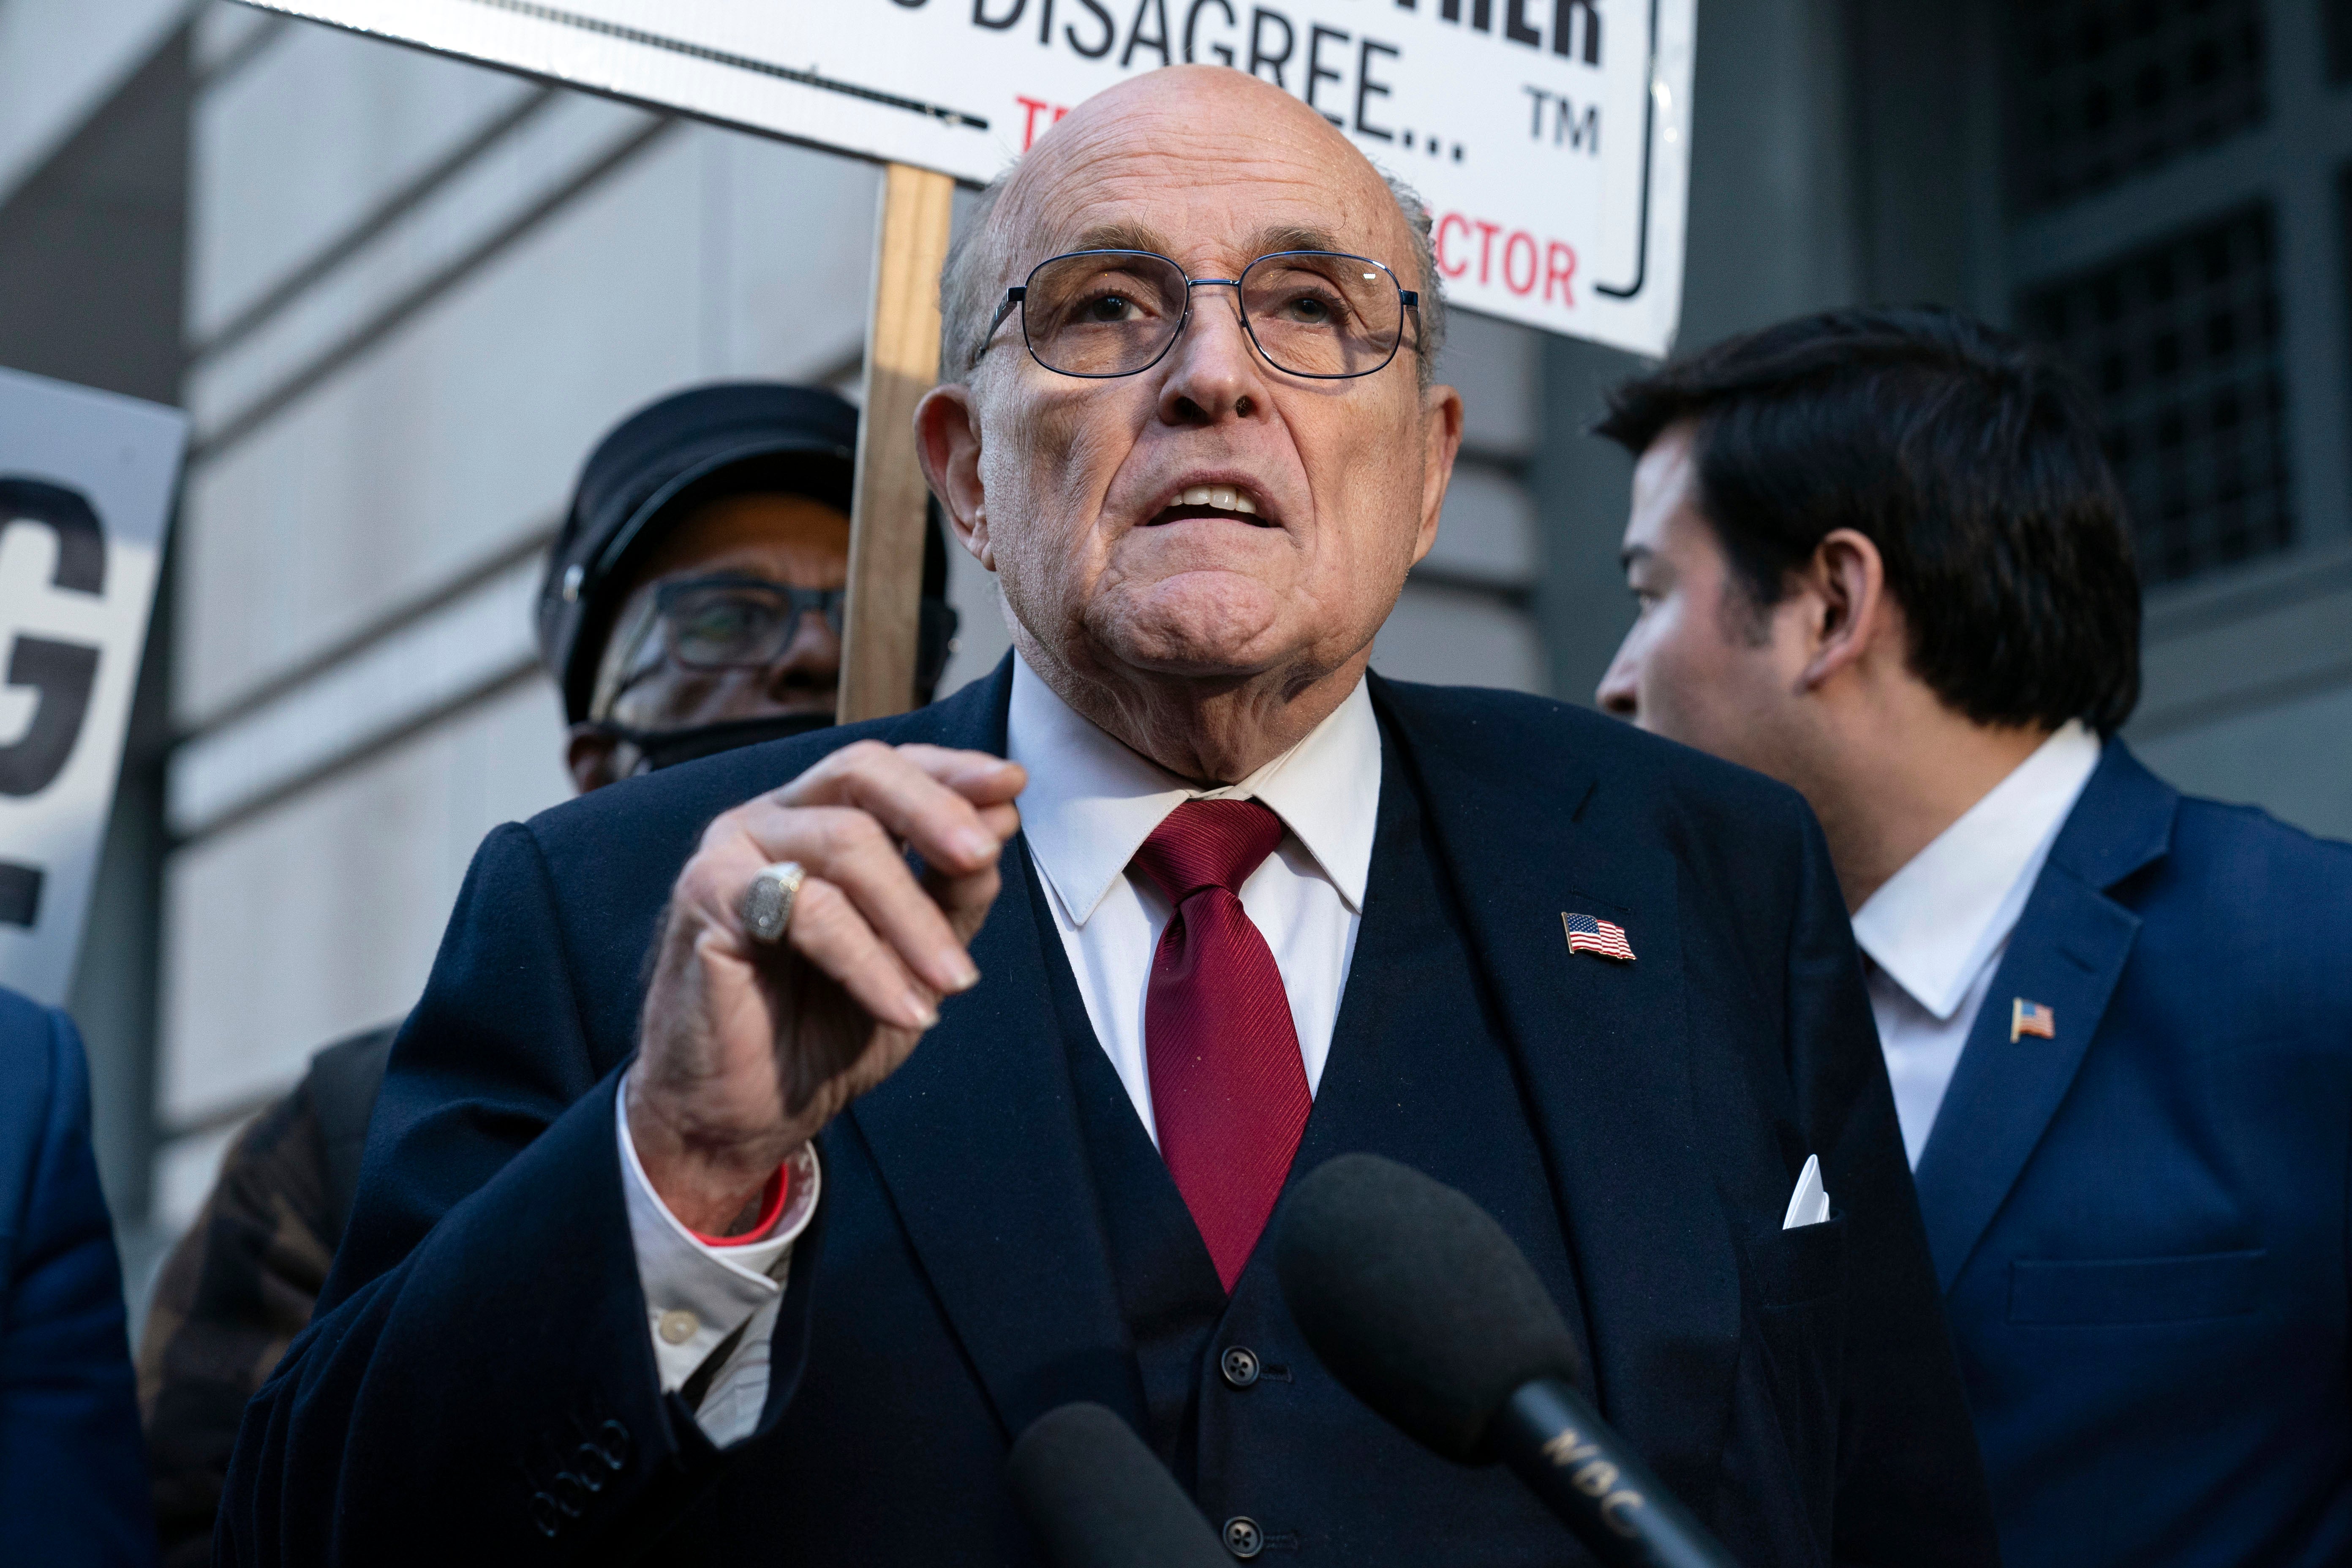 Rudy Giuliani appears to have been indicted related to a fake electors scheme in Arizona in 2020